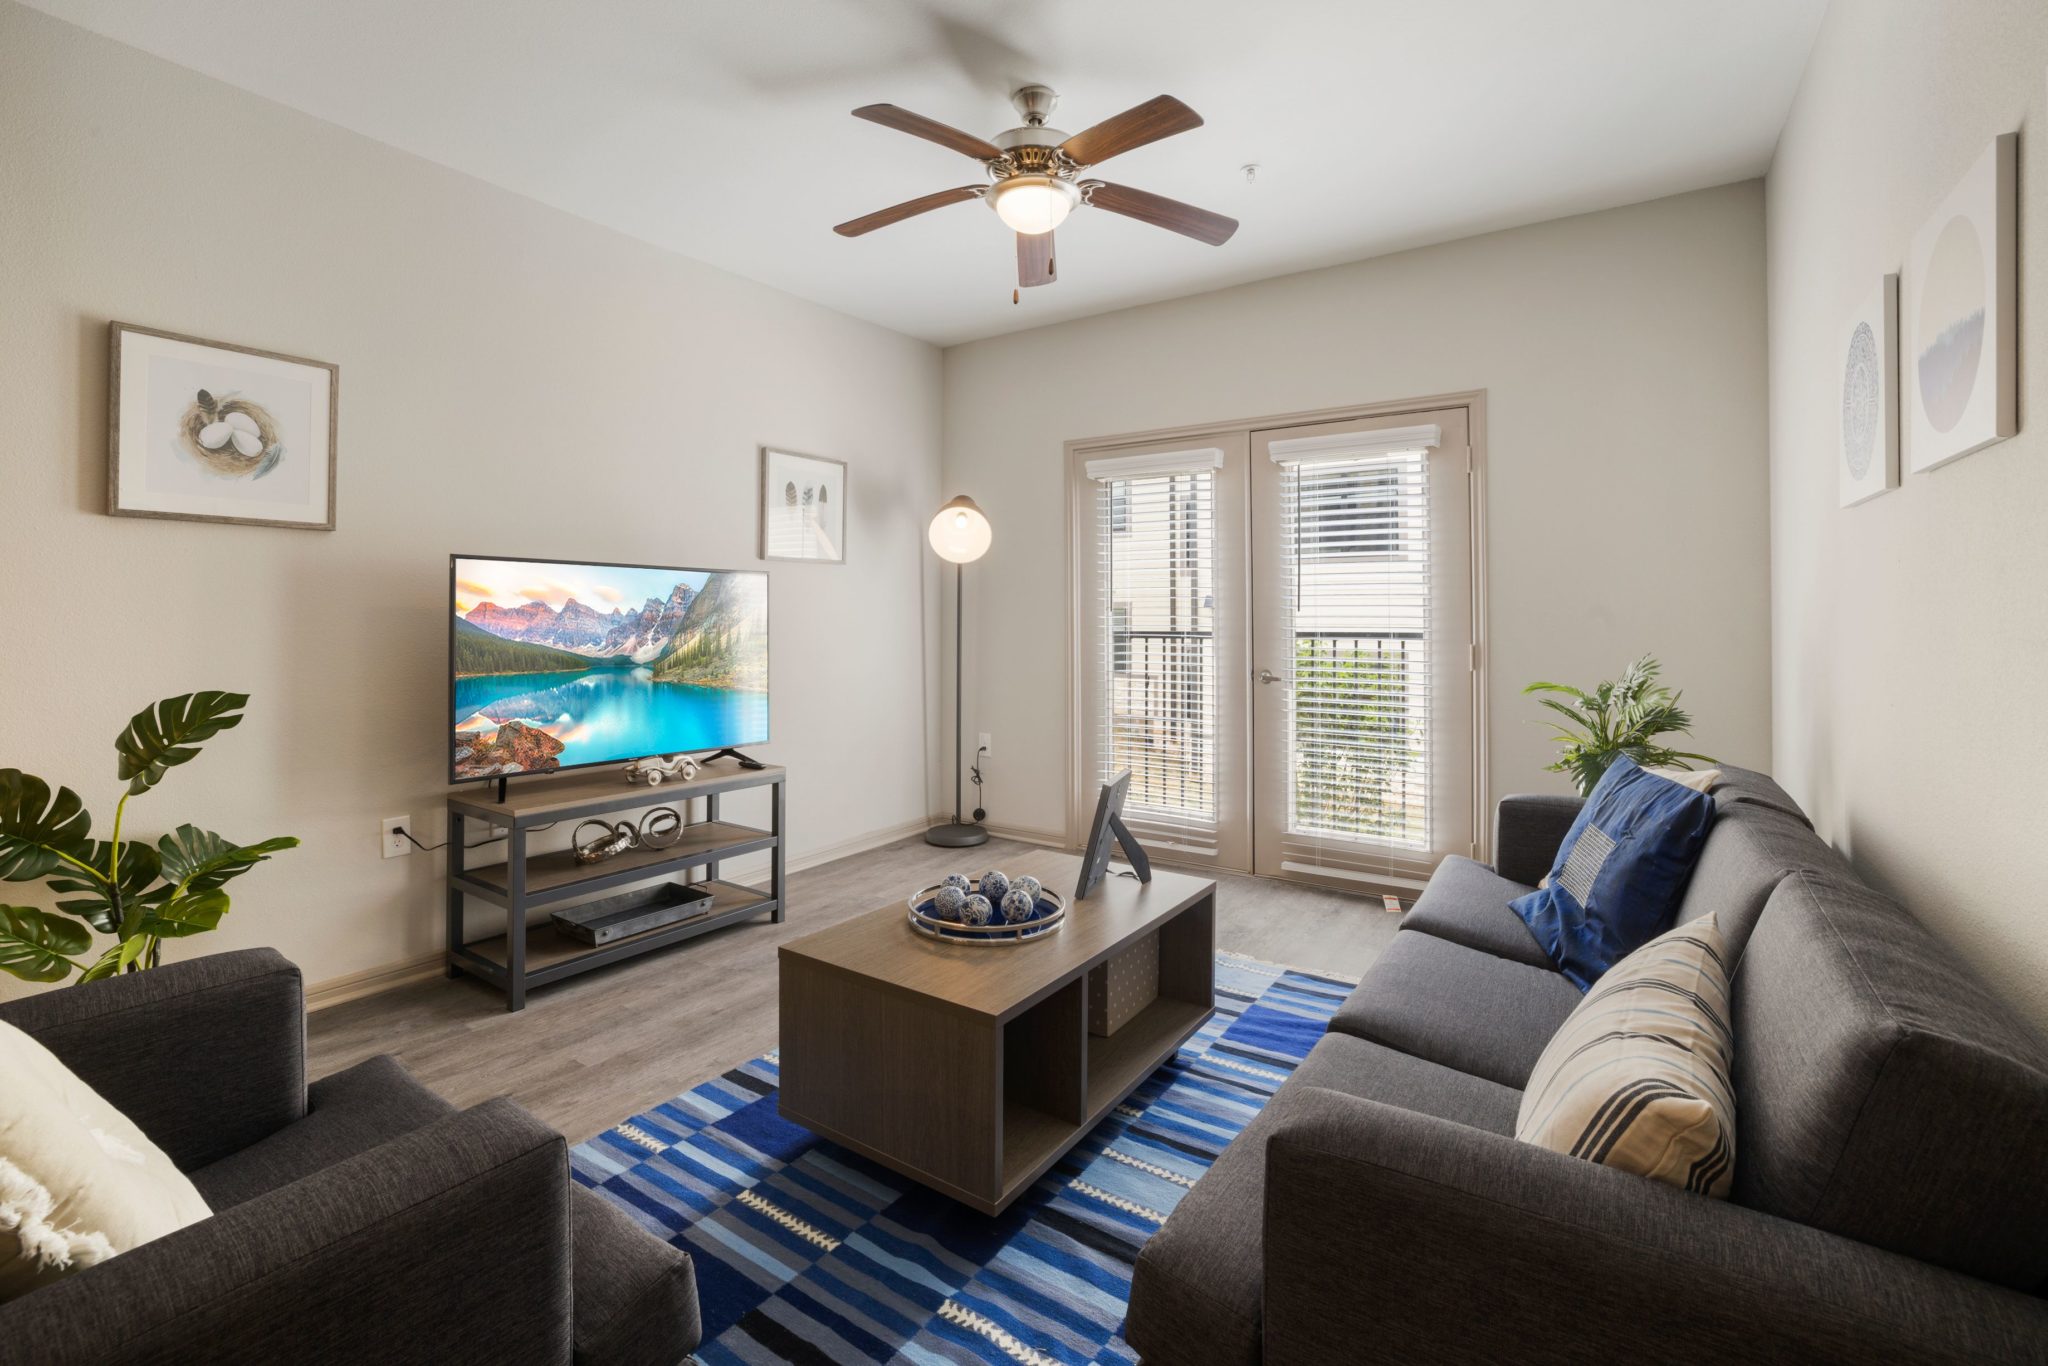 Tv Size For Apartment Living Room